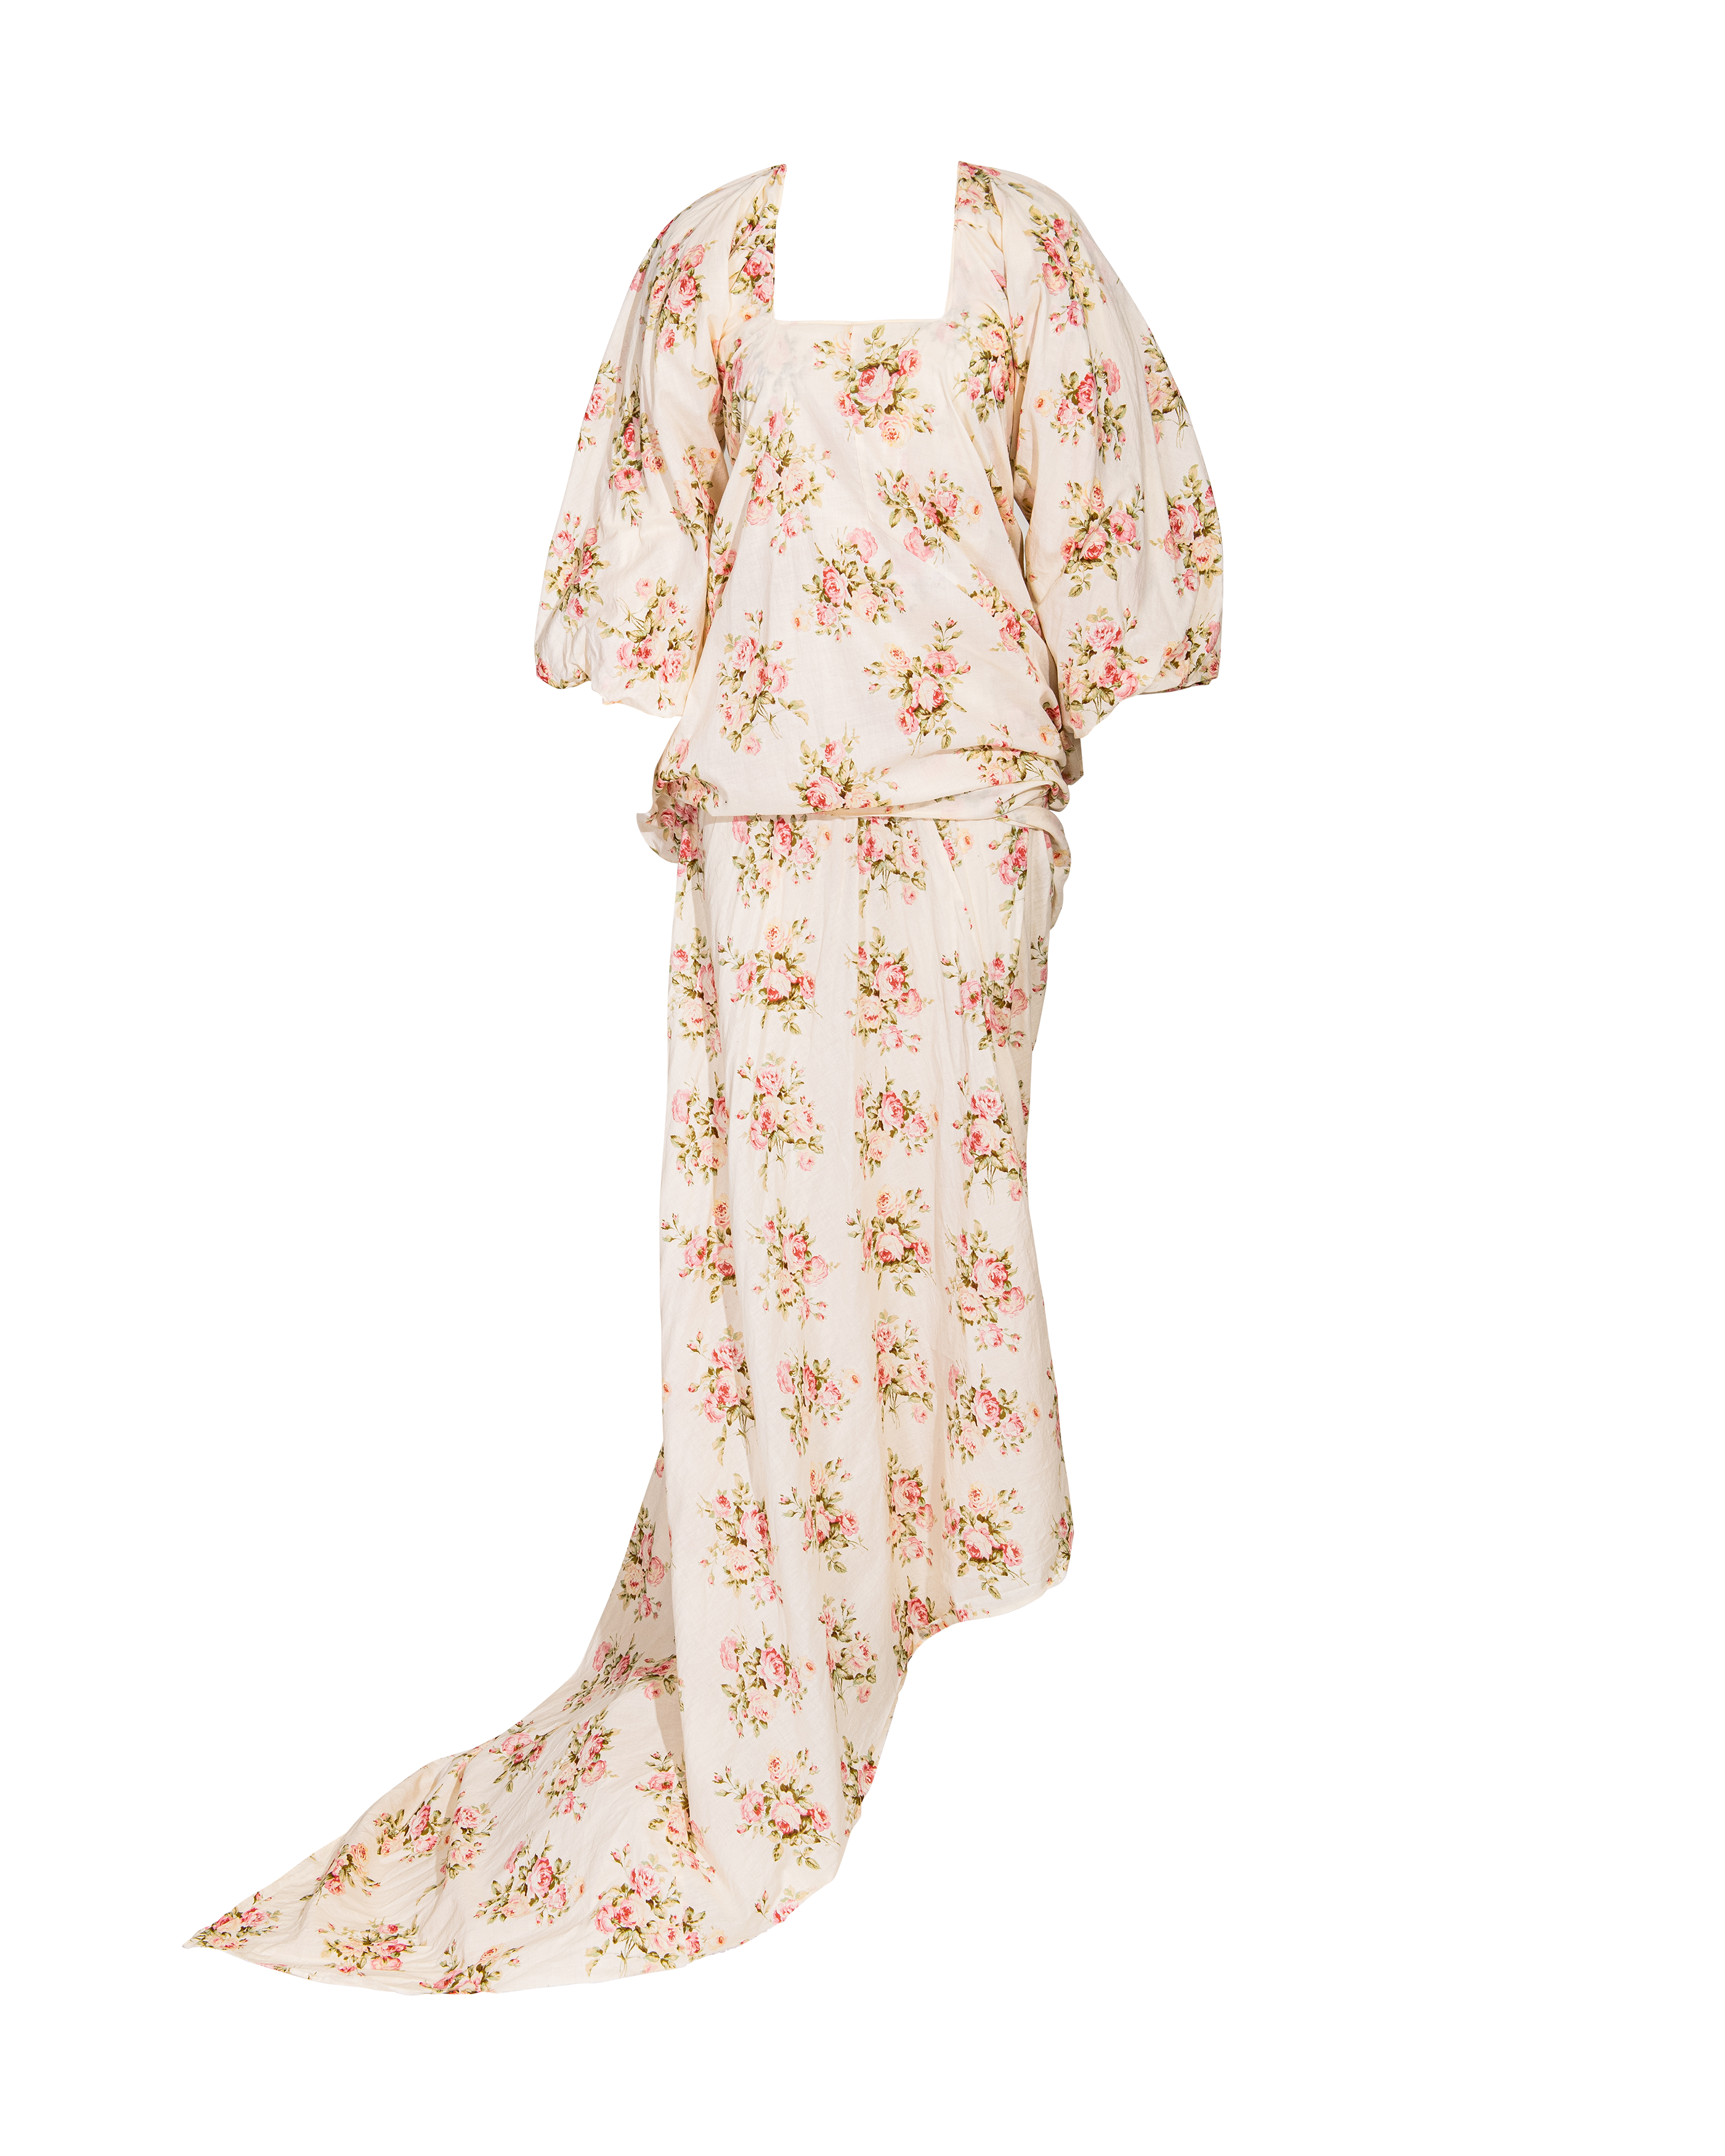 S/S 2008 Ecru Cotton Dress with Pink Floral Pattern